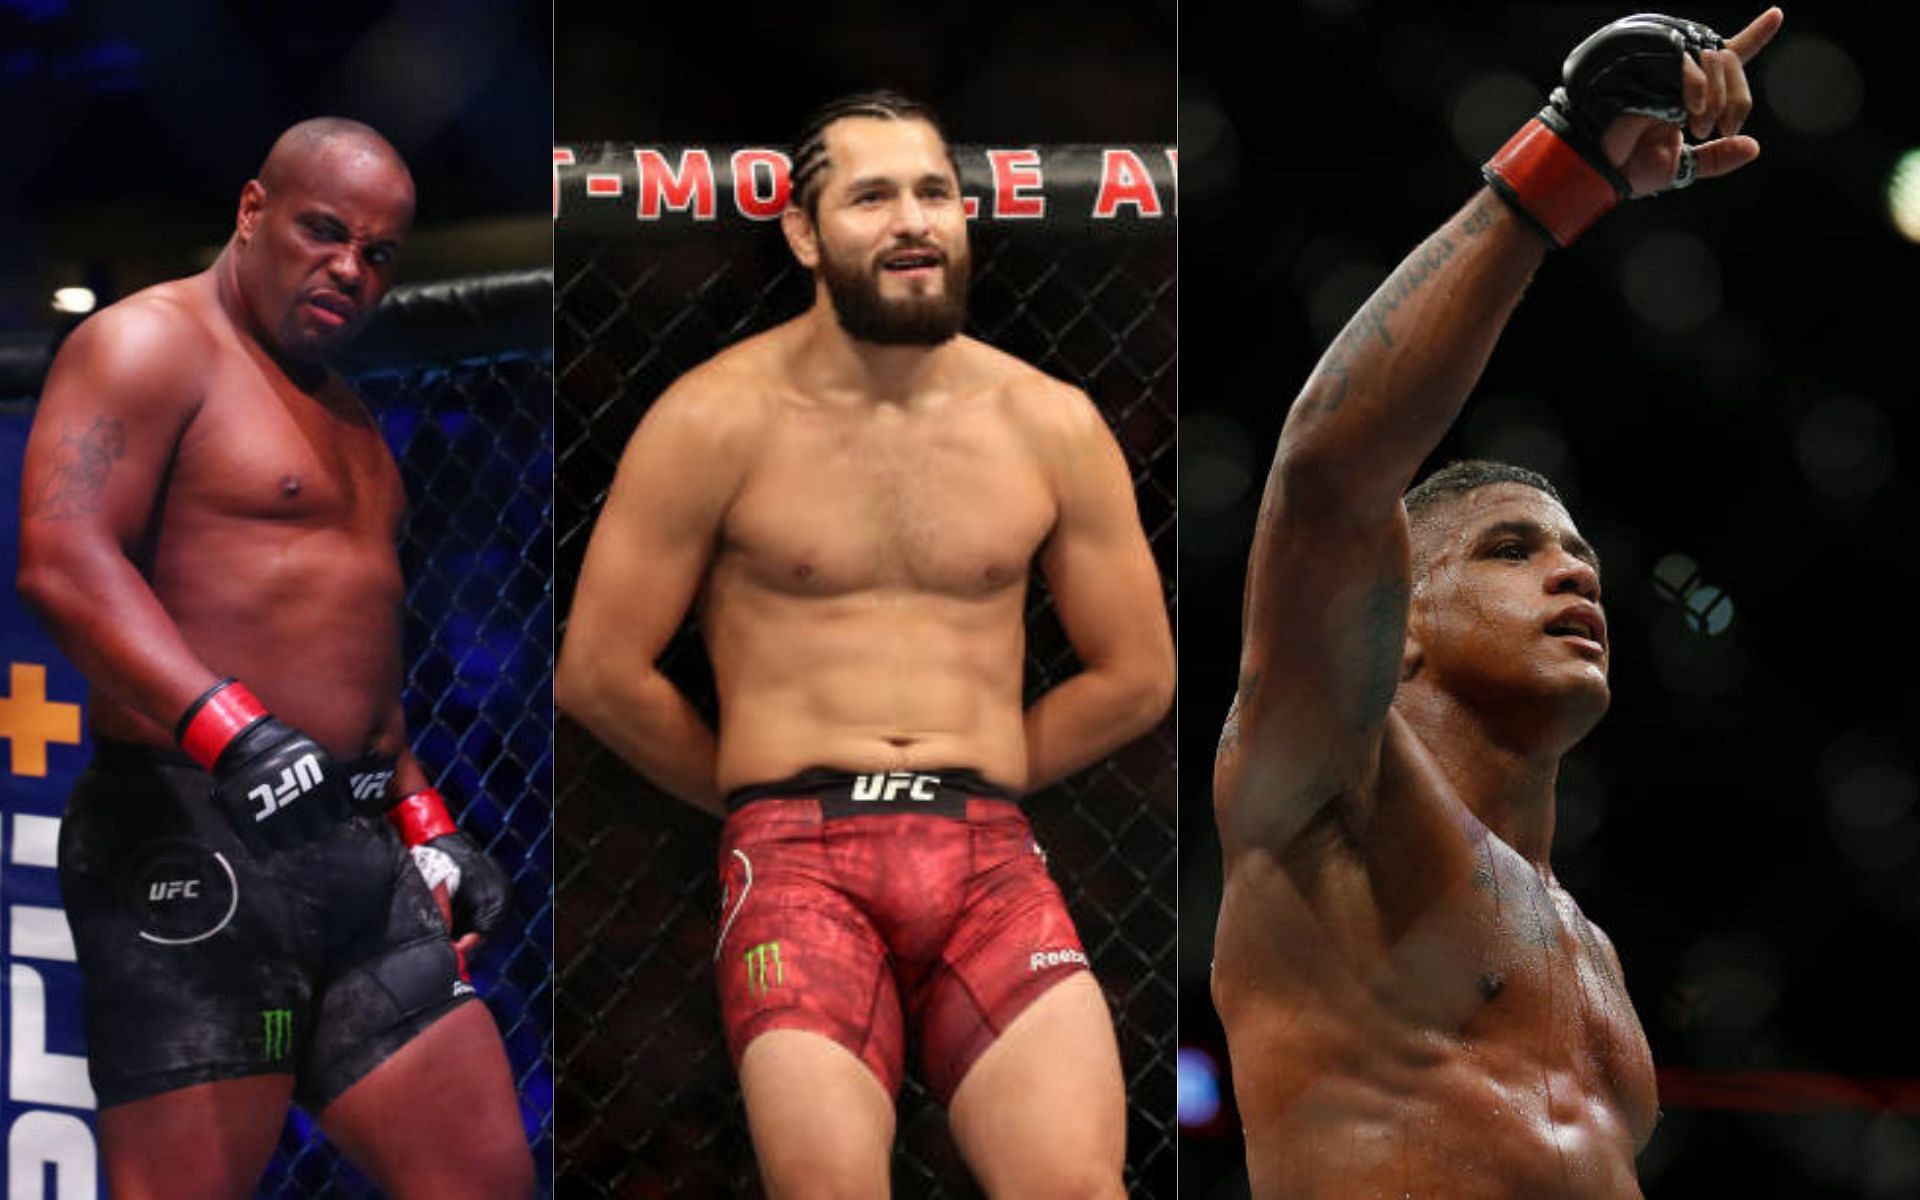 From left to right: Daniel Cormier, Jorge Masvidal, and Gilbert Burns